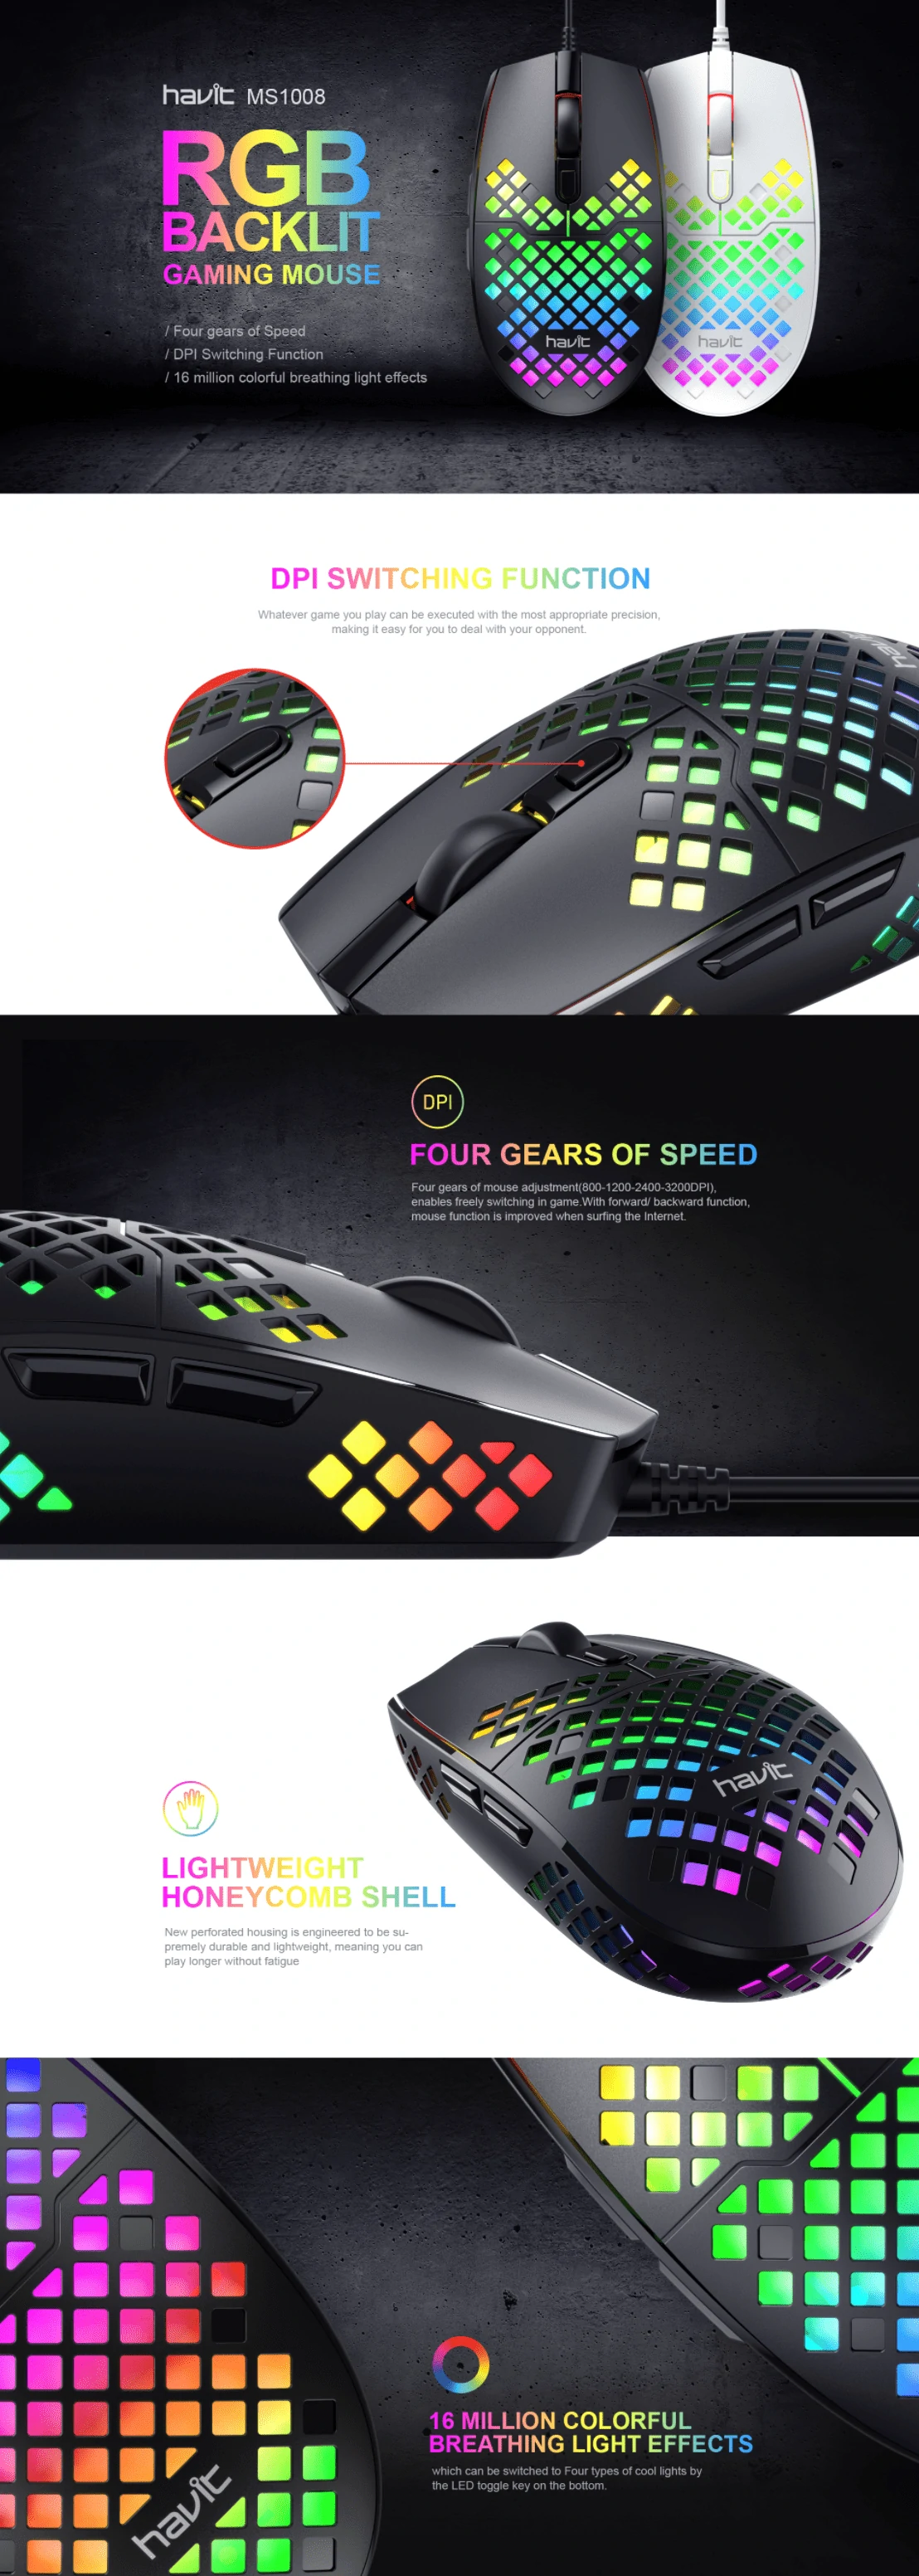 Overview - Havit - MS1008 Gaming Mouse